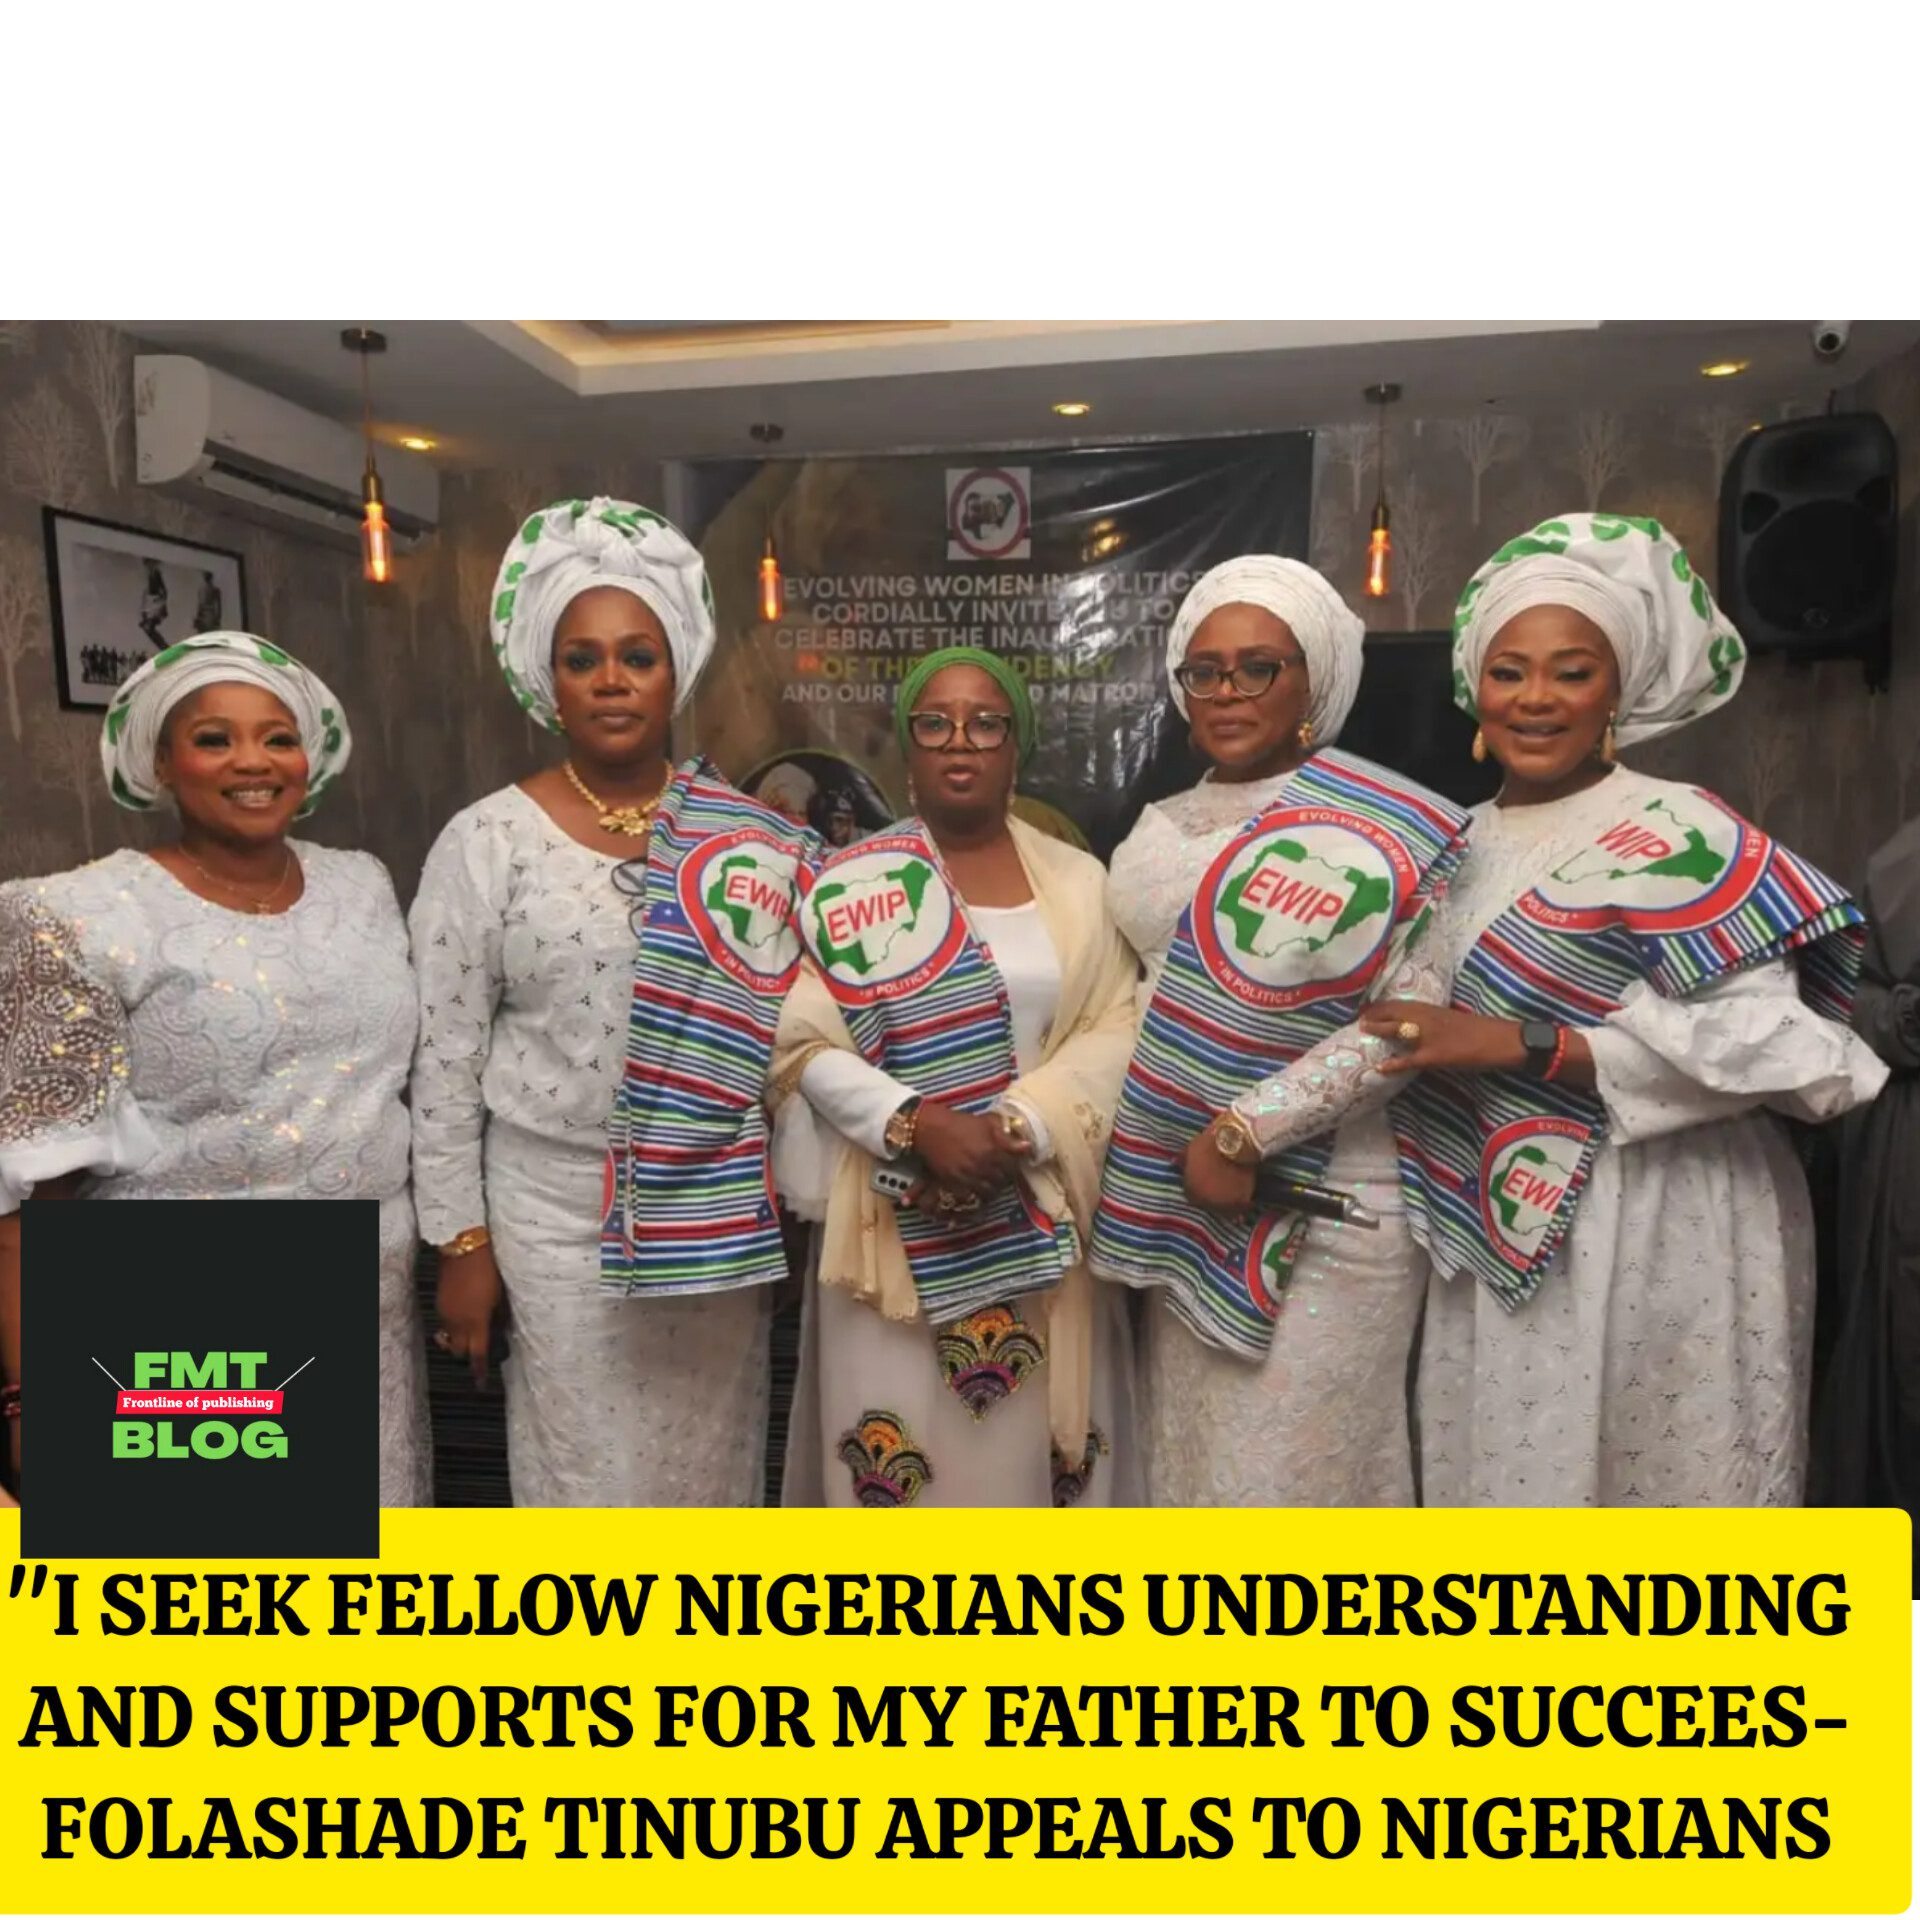 “I seek fellow NigerianS understanding and support for my father to succeed- Folashade Tinubu appeals to Nigerians